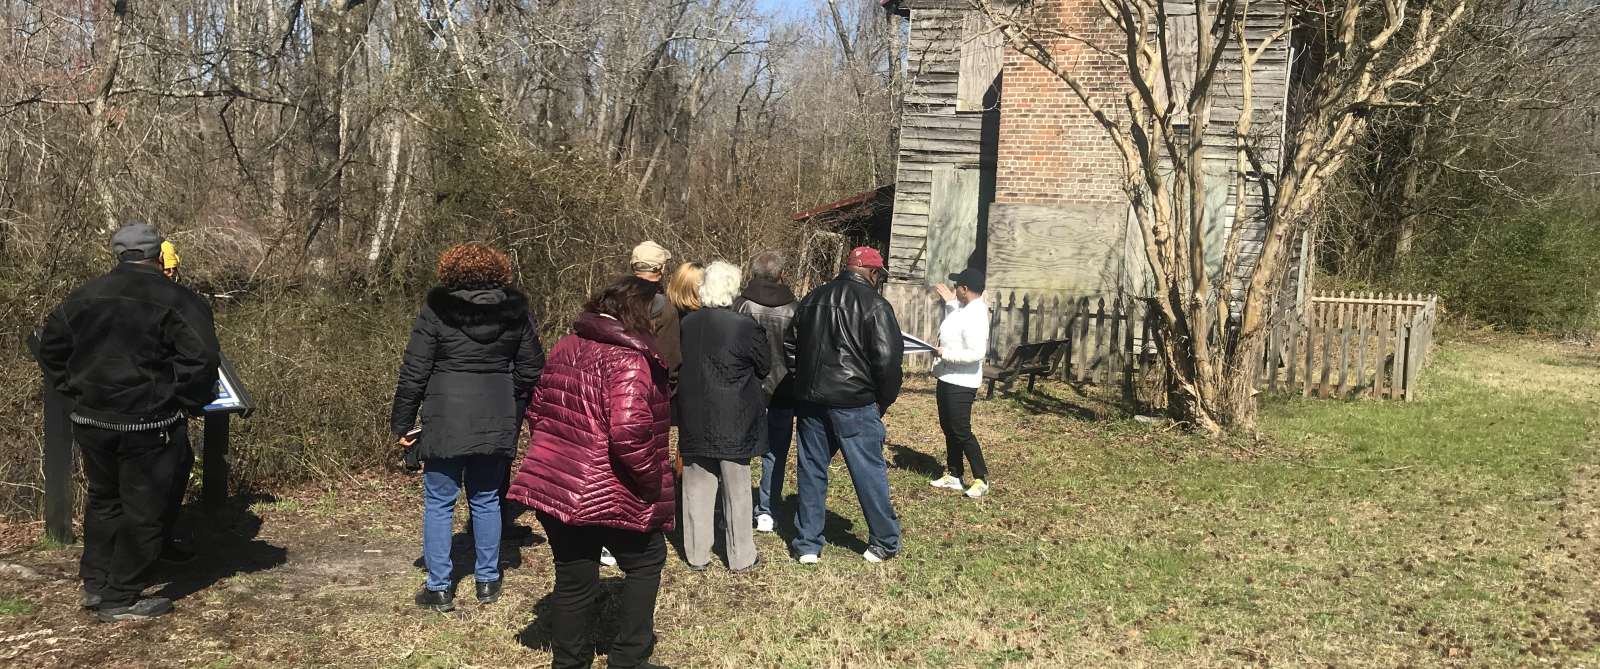 Visitors outside the Superintendent's House on the Dismal Swamp Canal in Chesapeake, VA